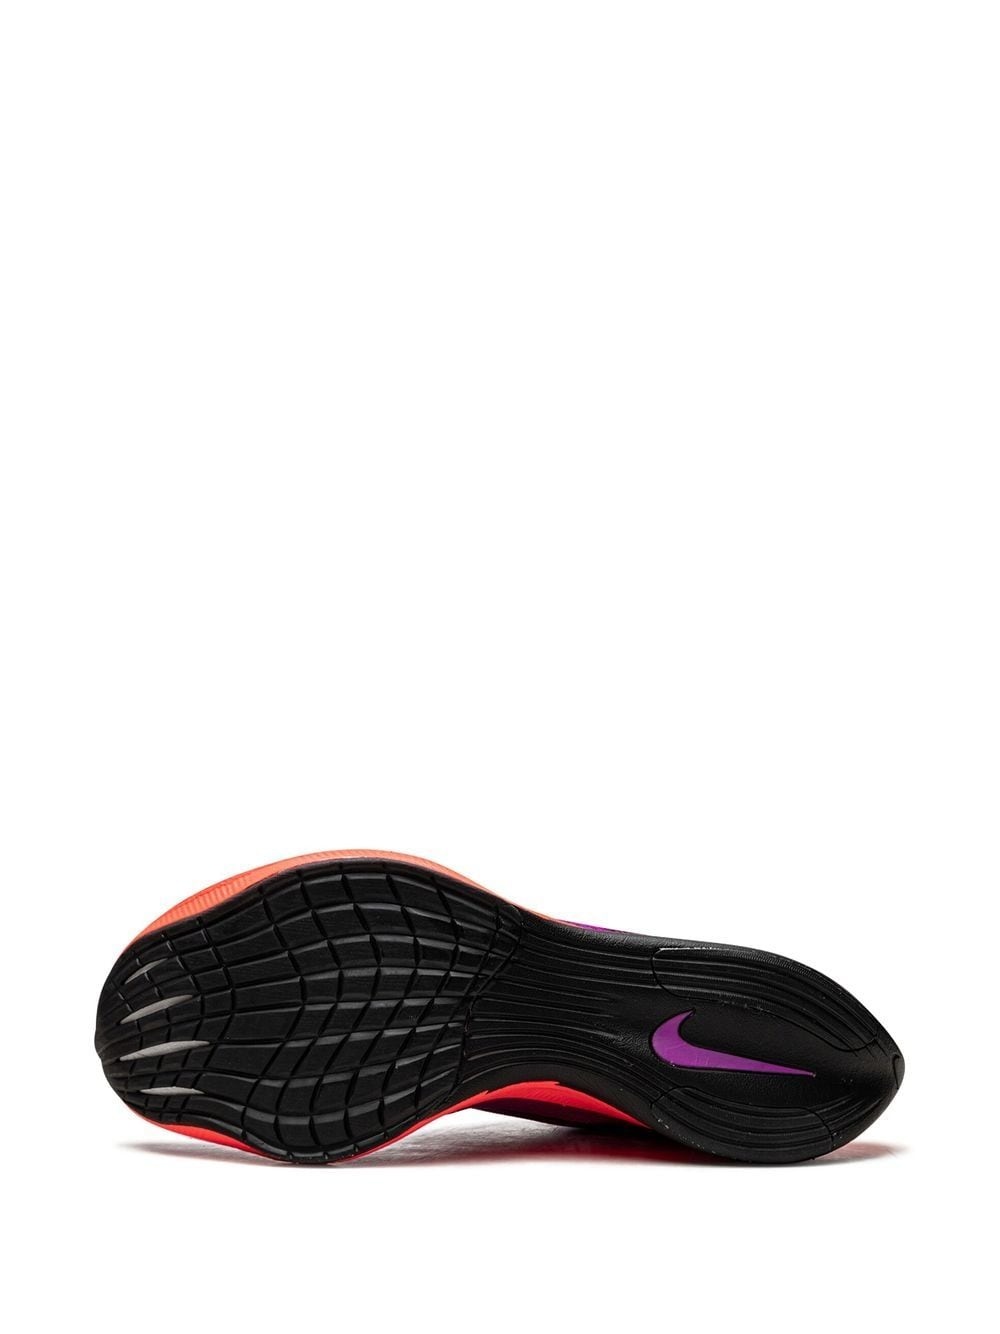 ZoomX Vaporfly Next % 2 "Hyper Violet" sneakers - 4